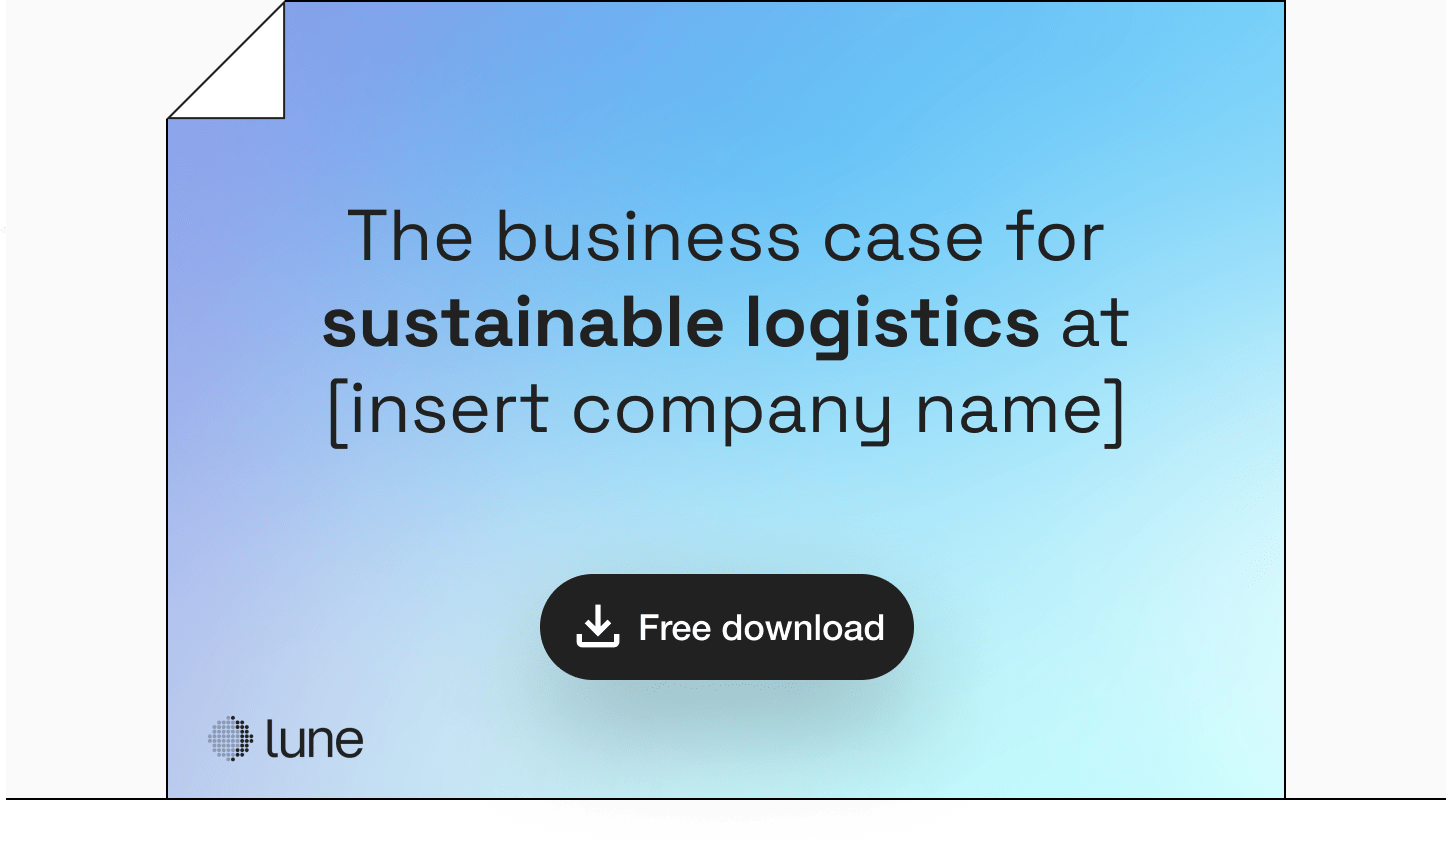 The business case for sustainable logistics at [insert company name]